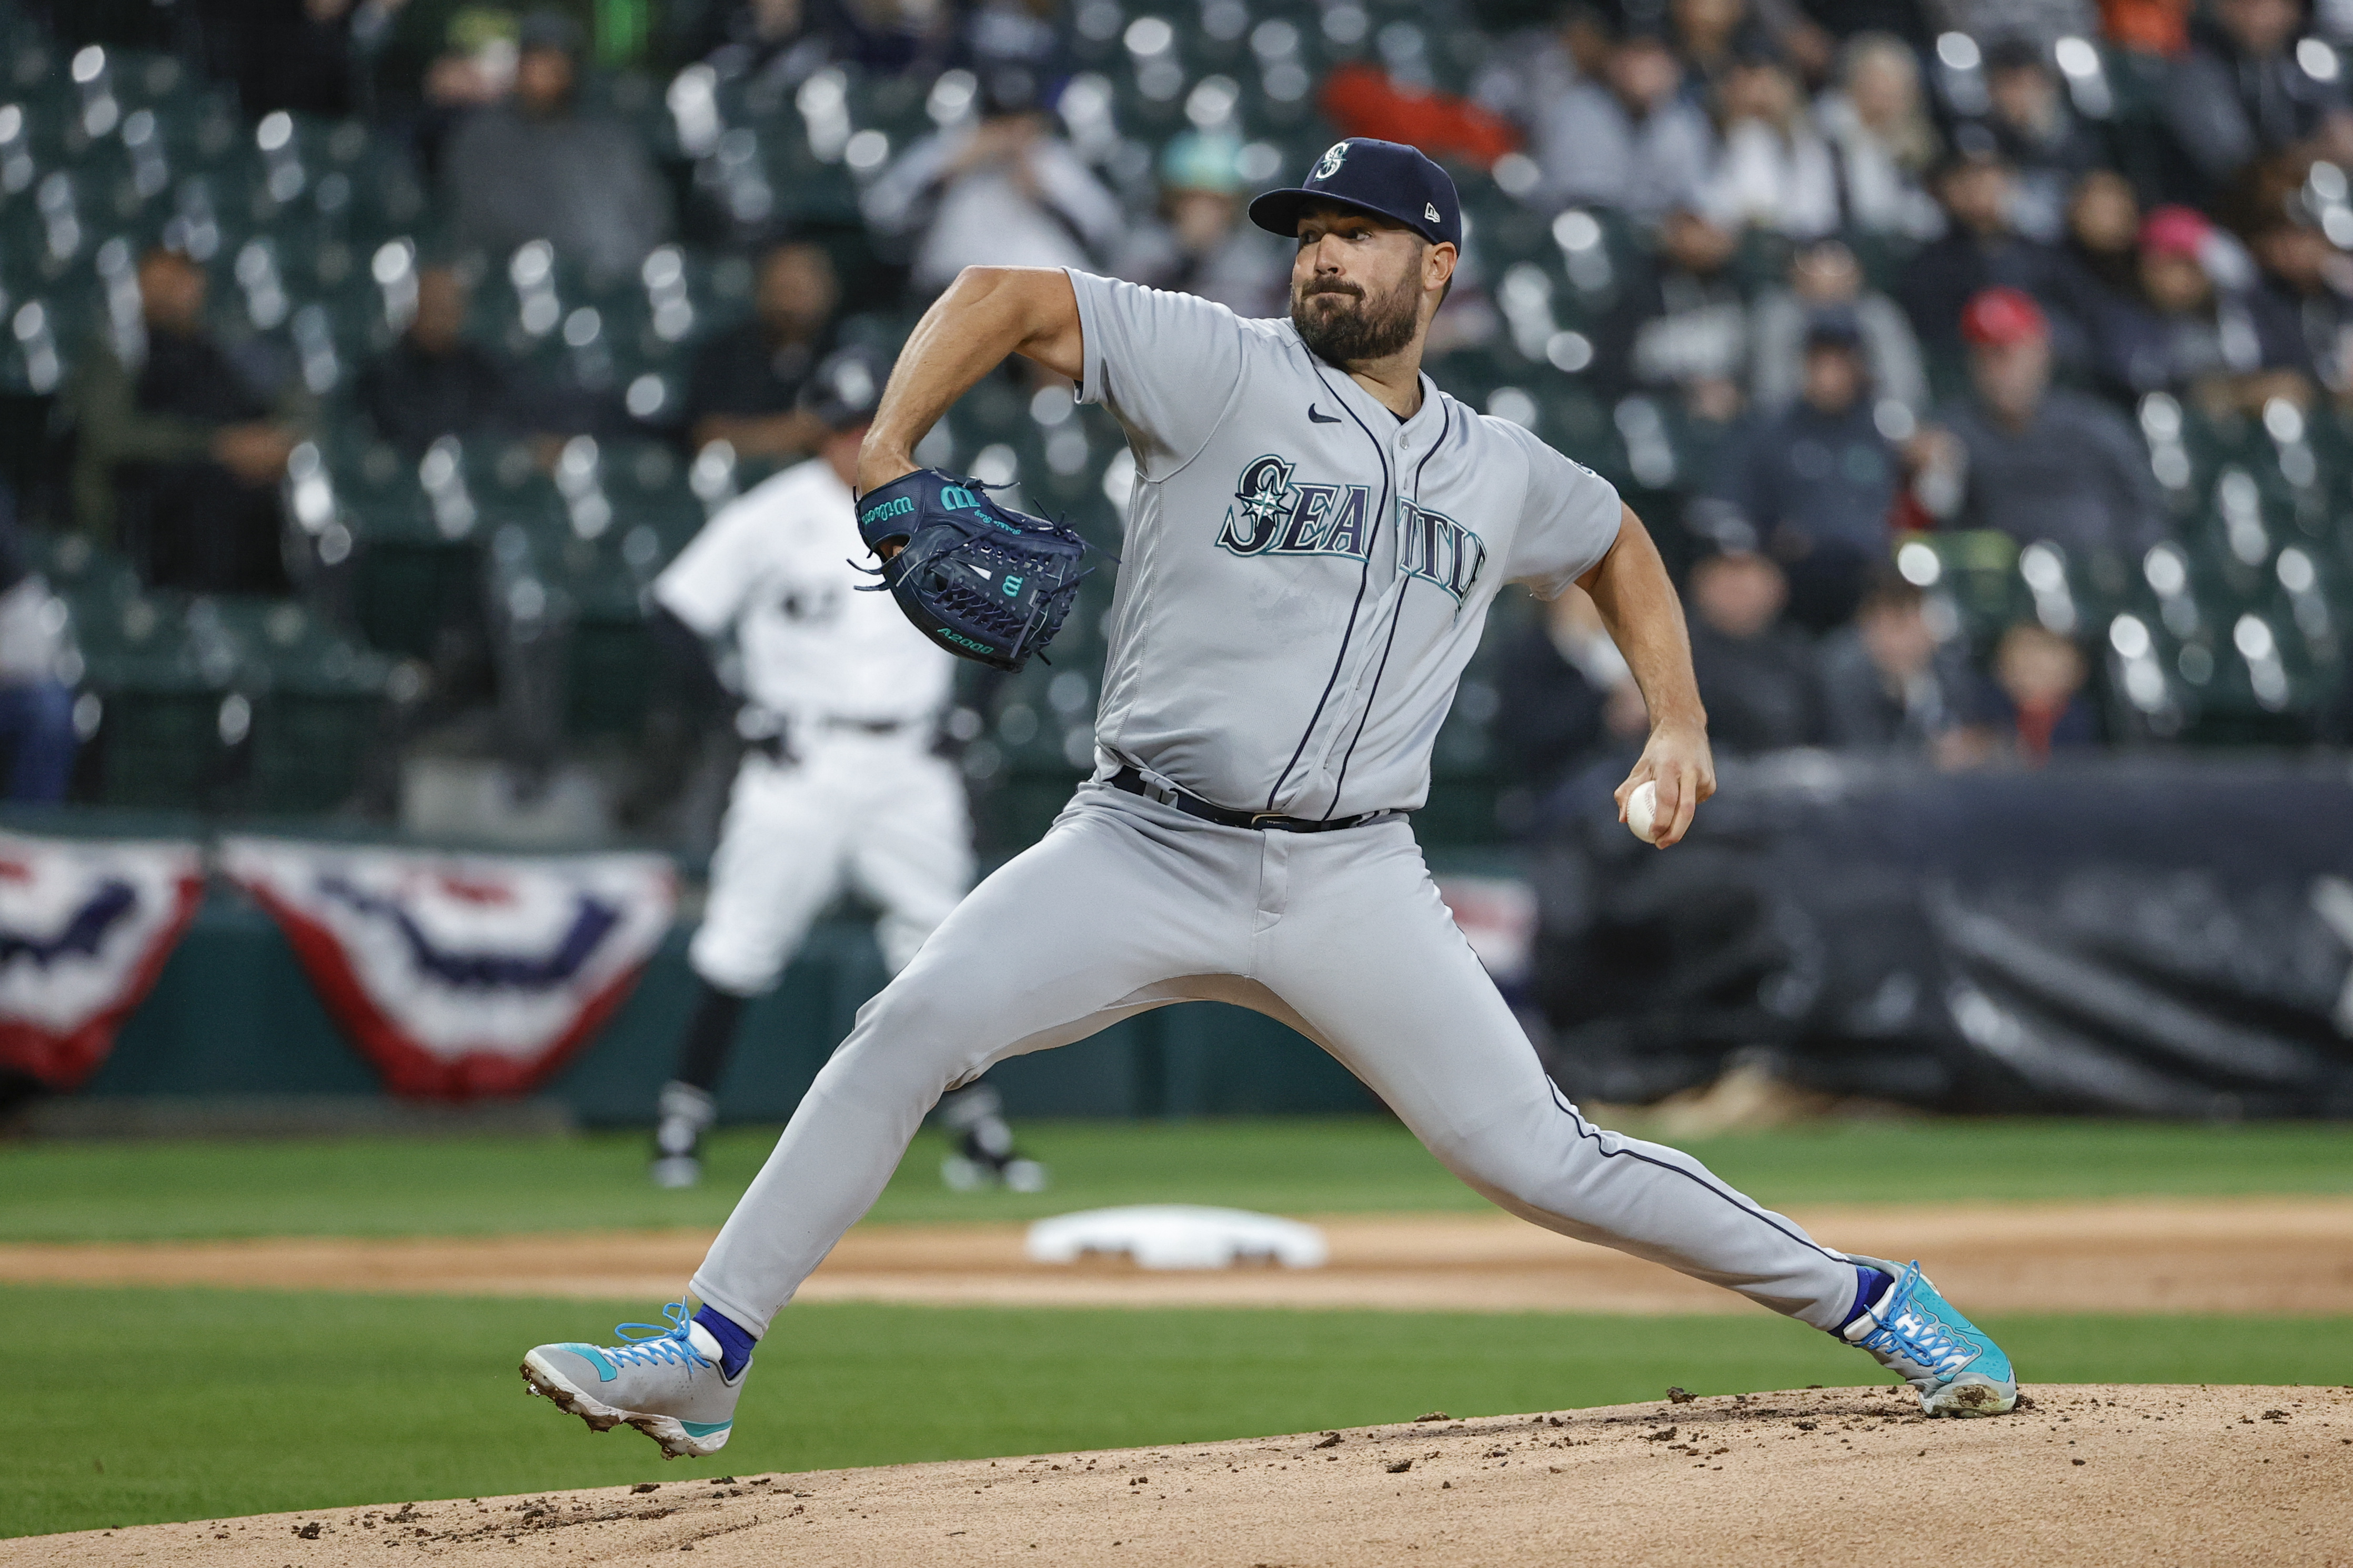 Underdog of the Day: Bet on the Seattle Mariners on May 5